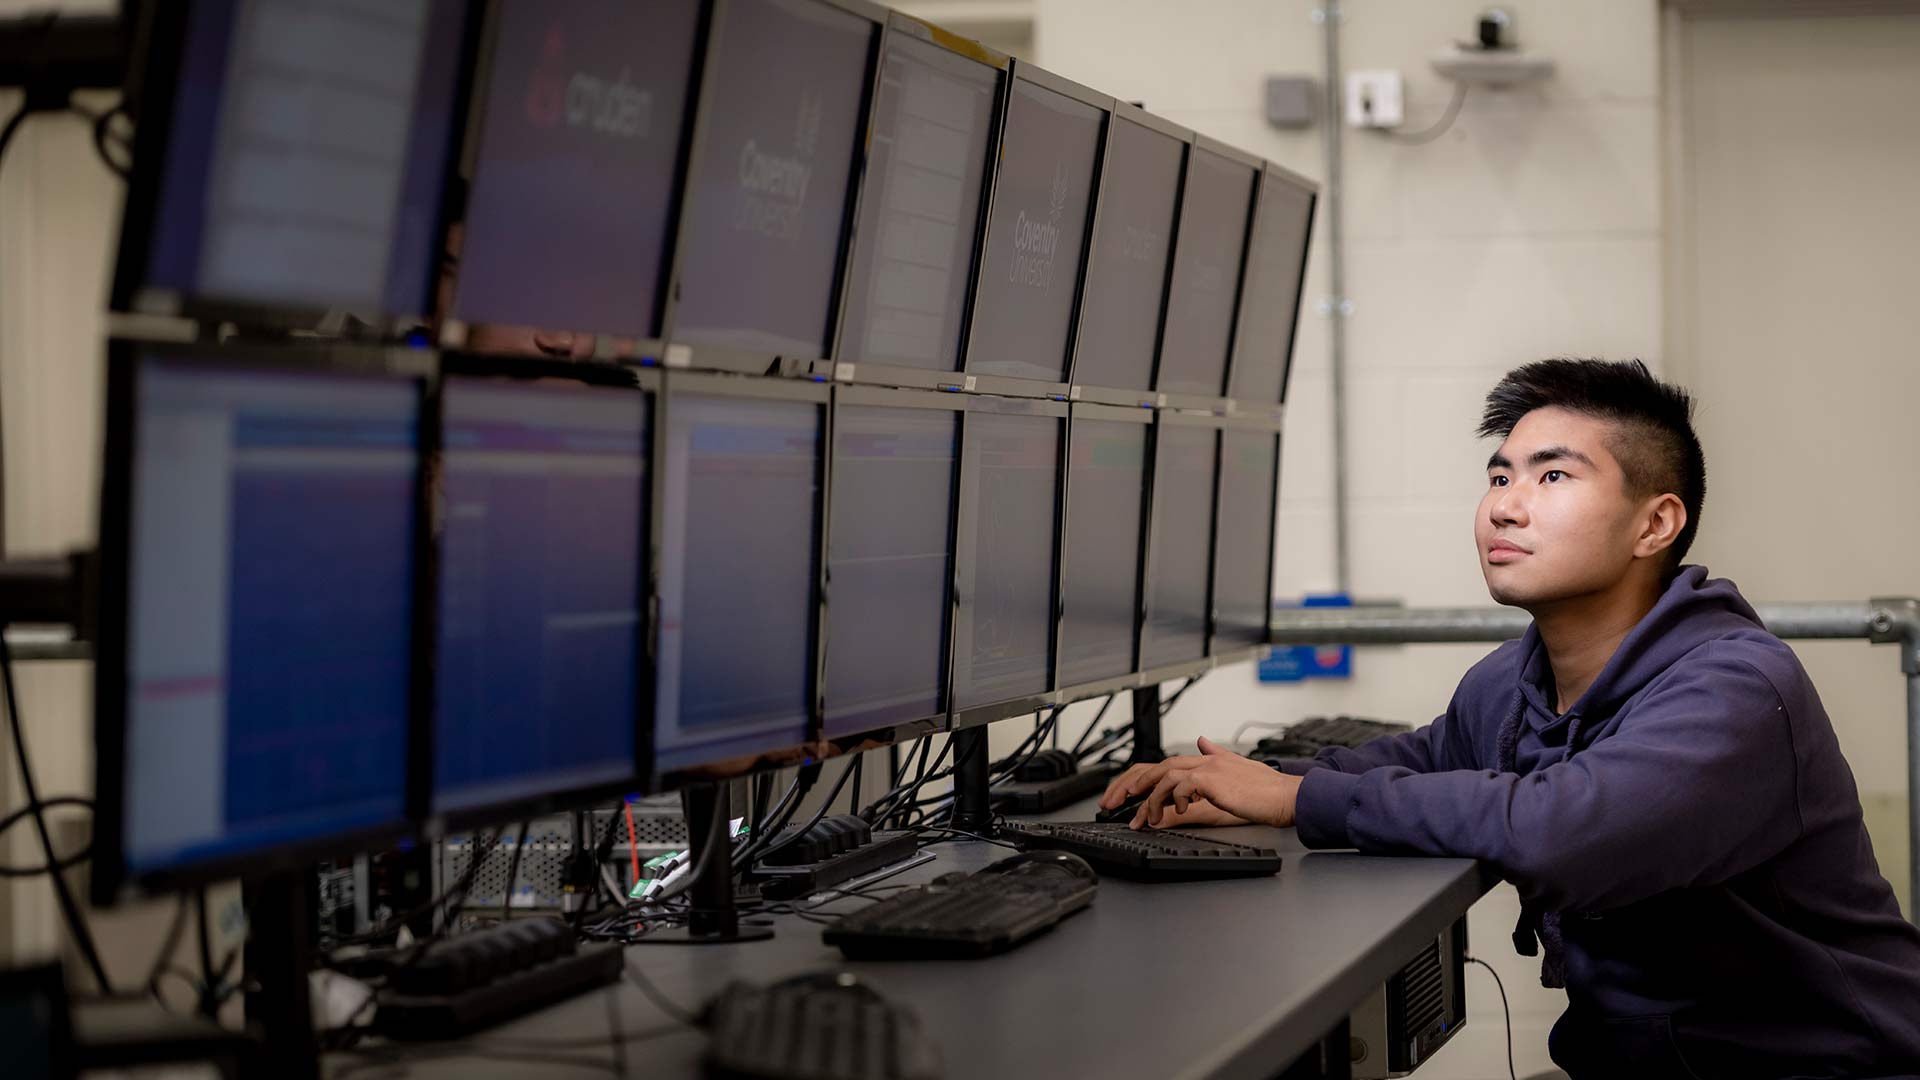 male student looking at a double bank of computer monitors